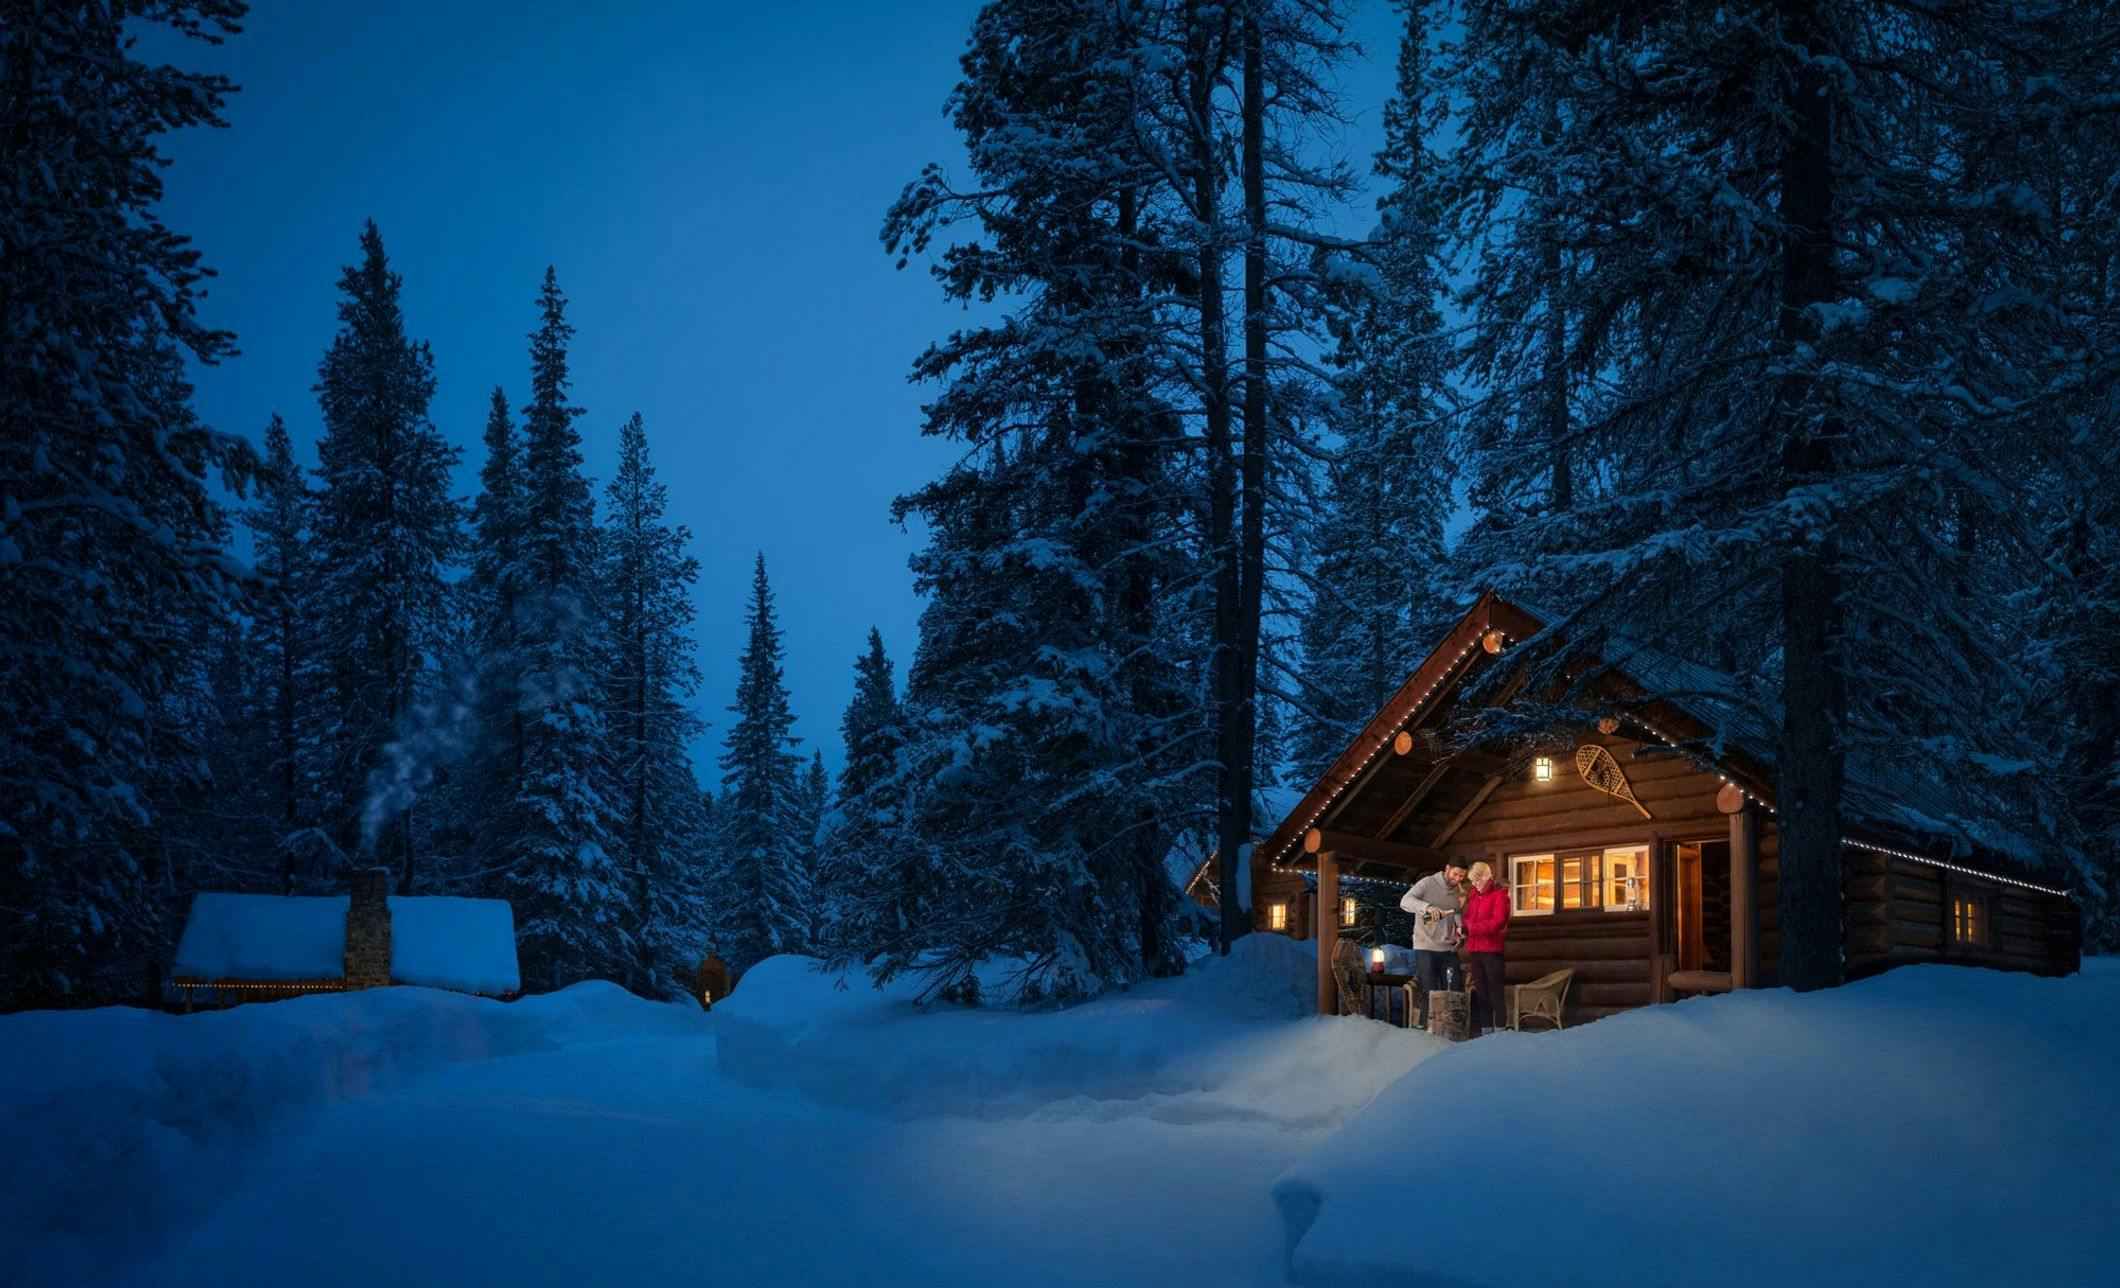 Cabin surrounded by snow in the evening with a couple on the porch sharing a bottle of wine